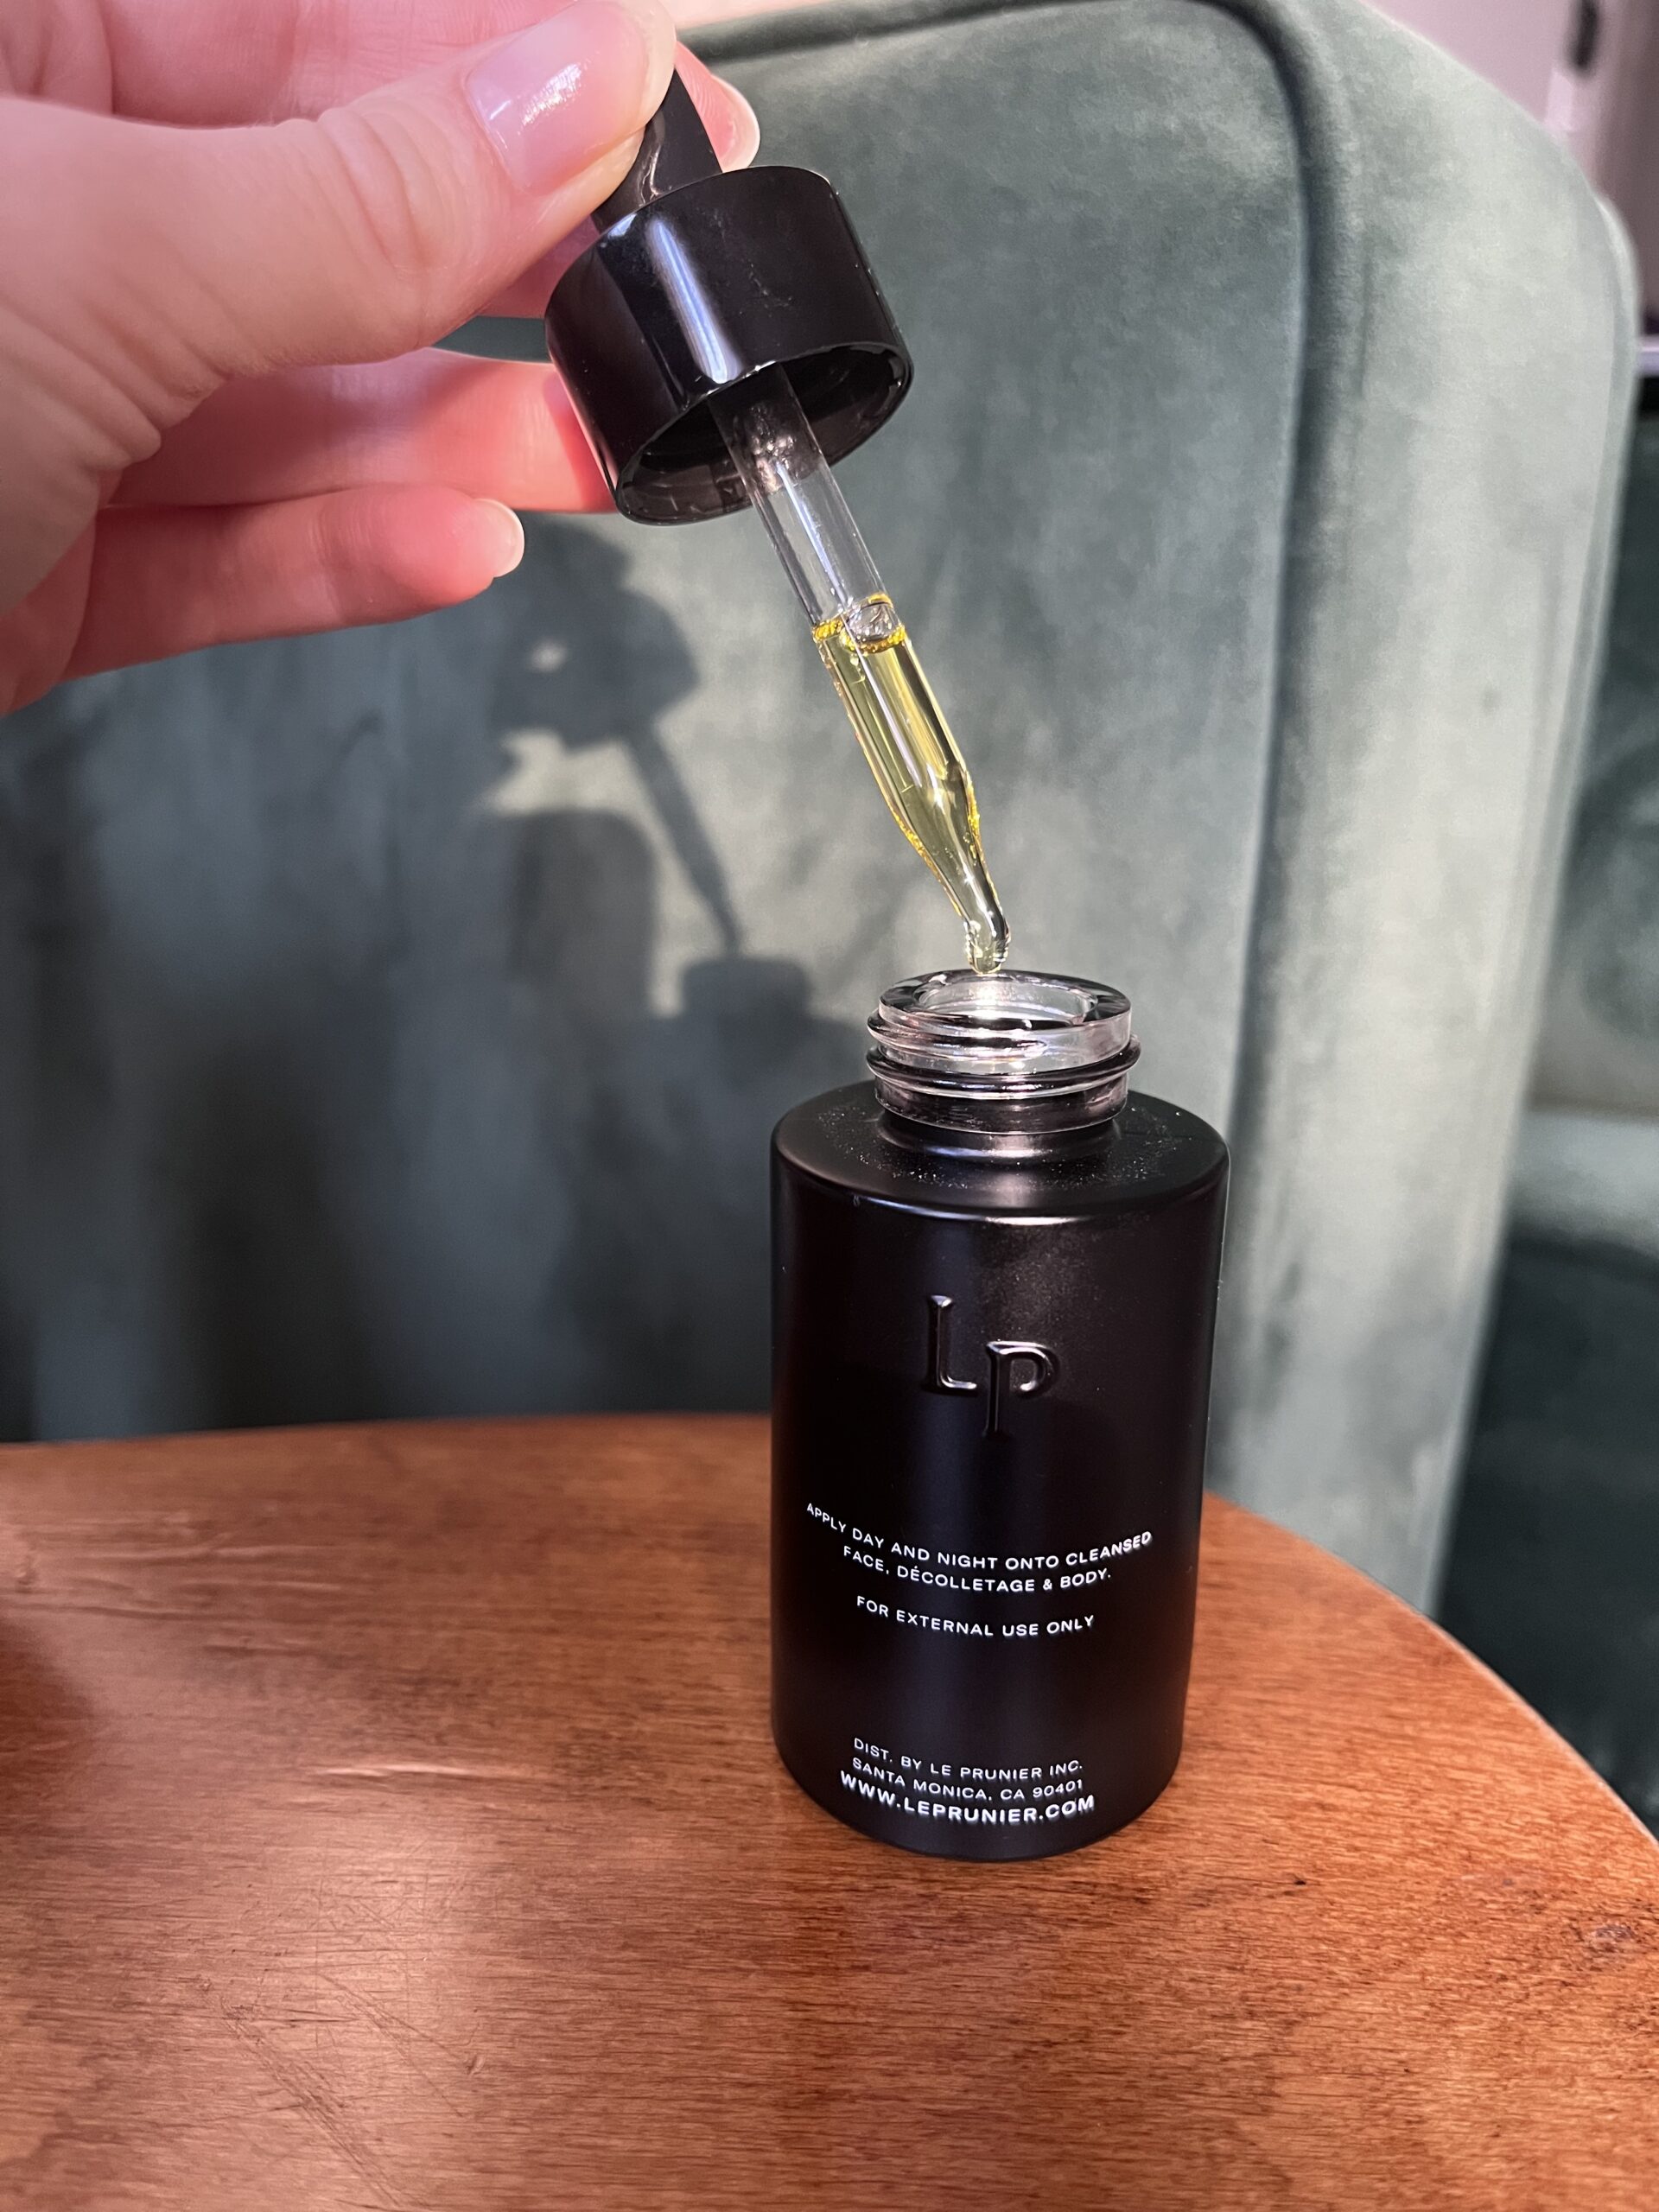 A hand holding the dropper of Le Prunier Beauty Oil